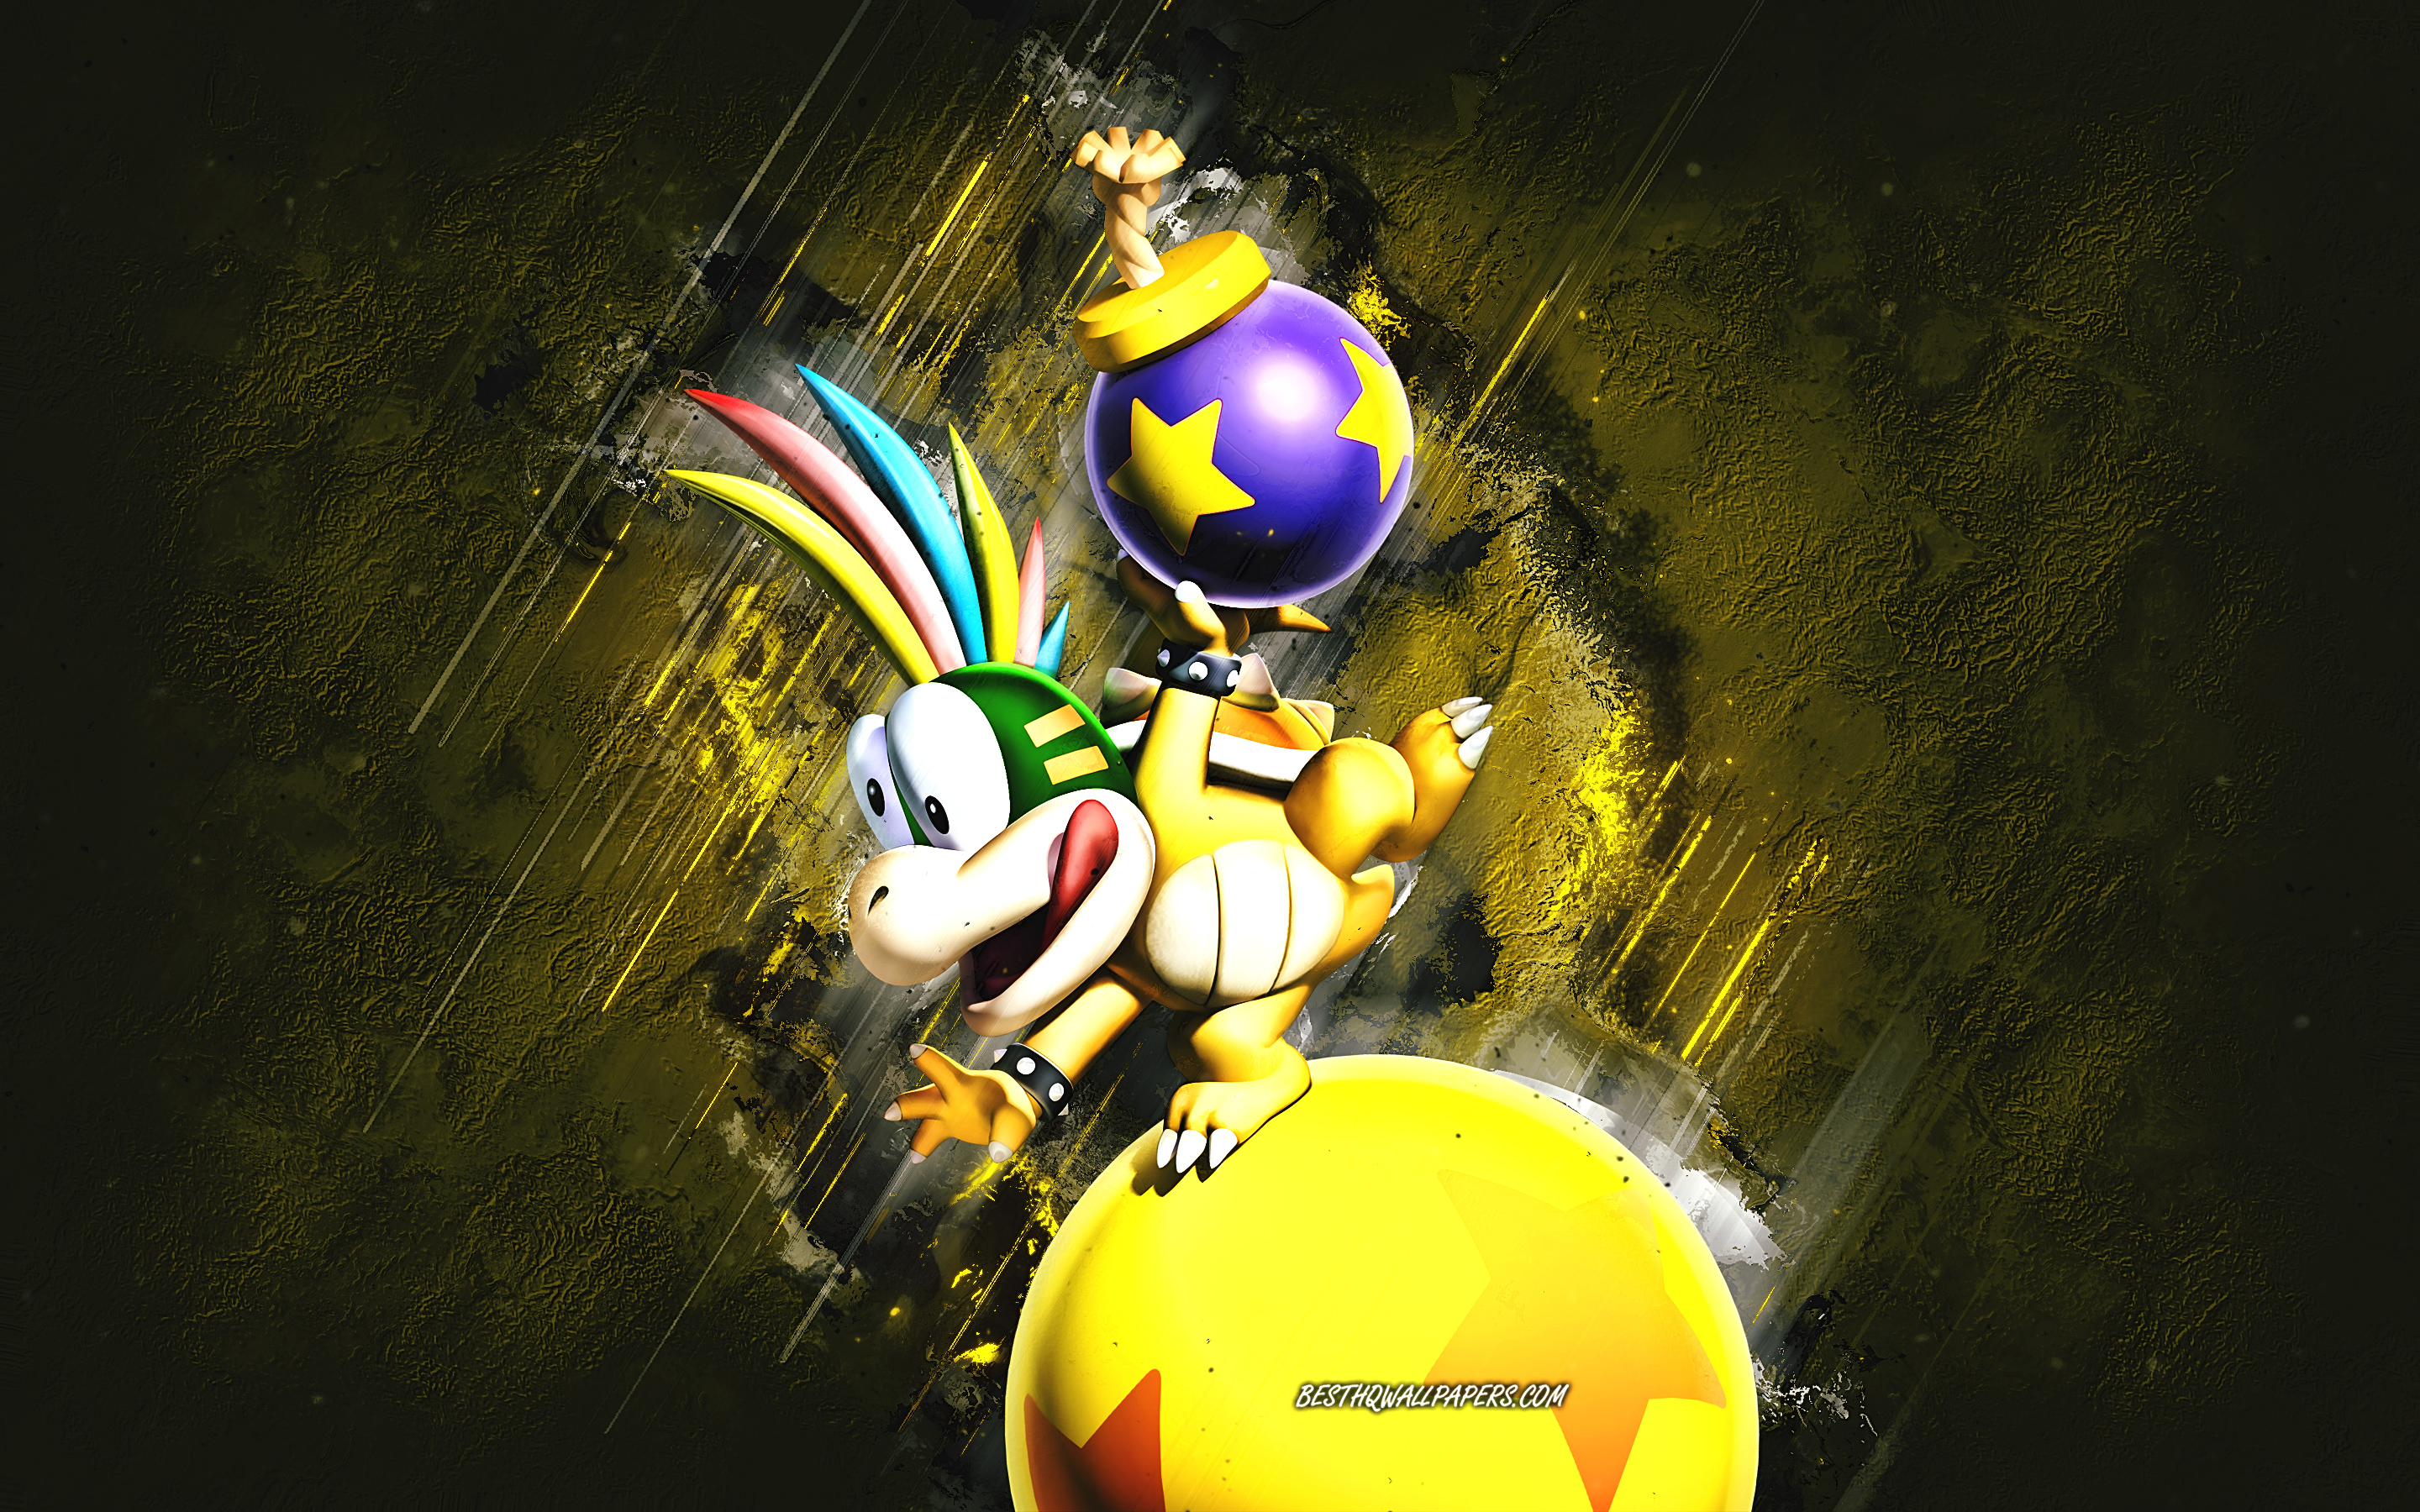 Download wallpaper Lemmy Koopa, Super Mario, Mario Party Star Rush, characters, yellow stone background, Super Mario main characters, Lemmy Koopa Super Mario for desktop with resolution 2880x1800. High Quality HD picture wallpaper